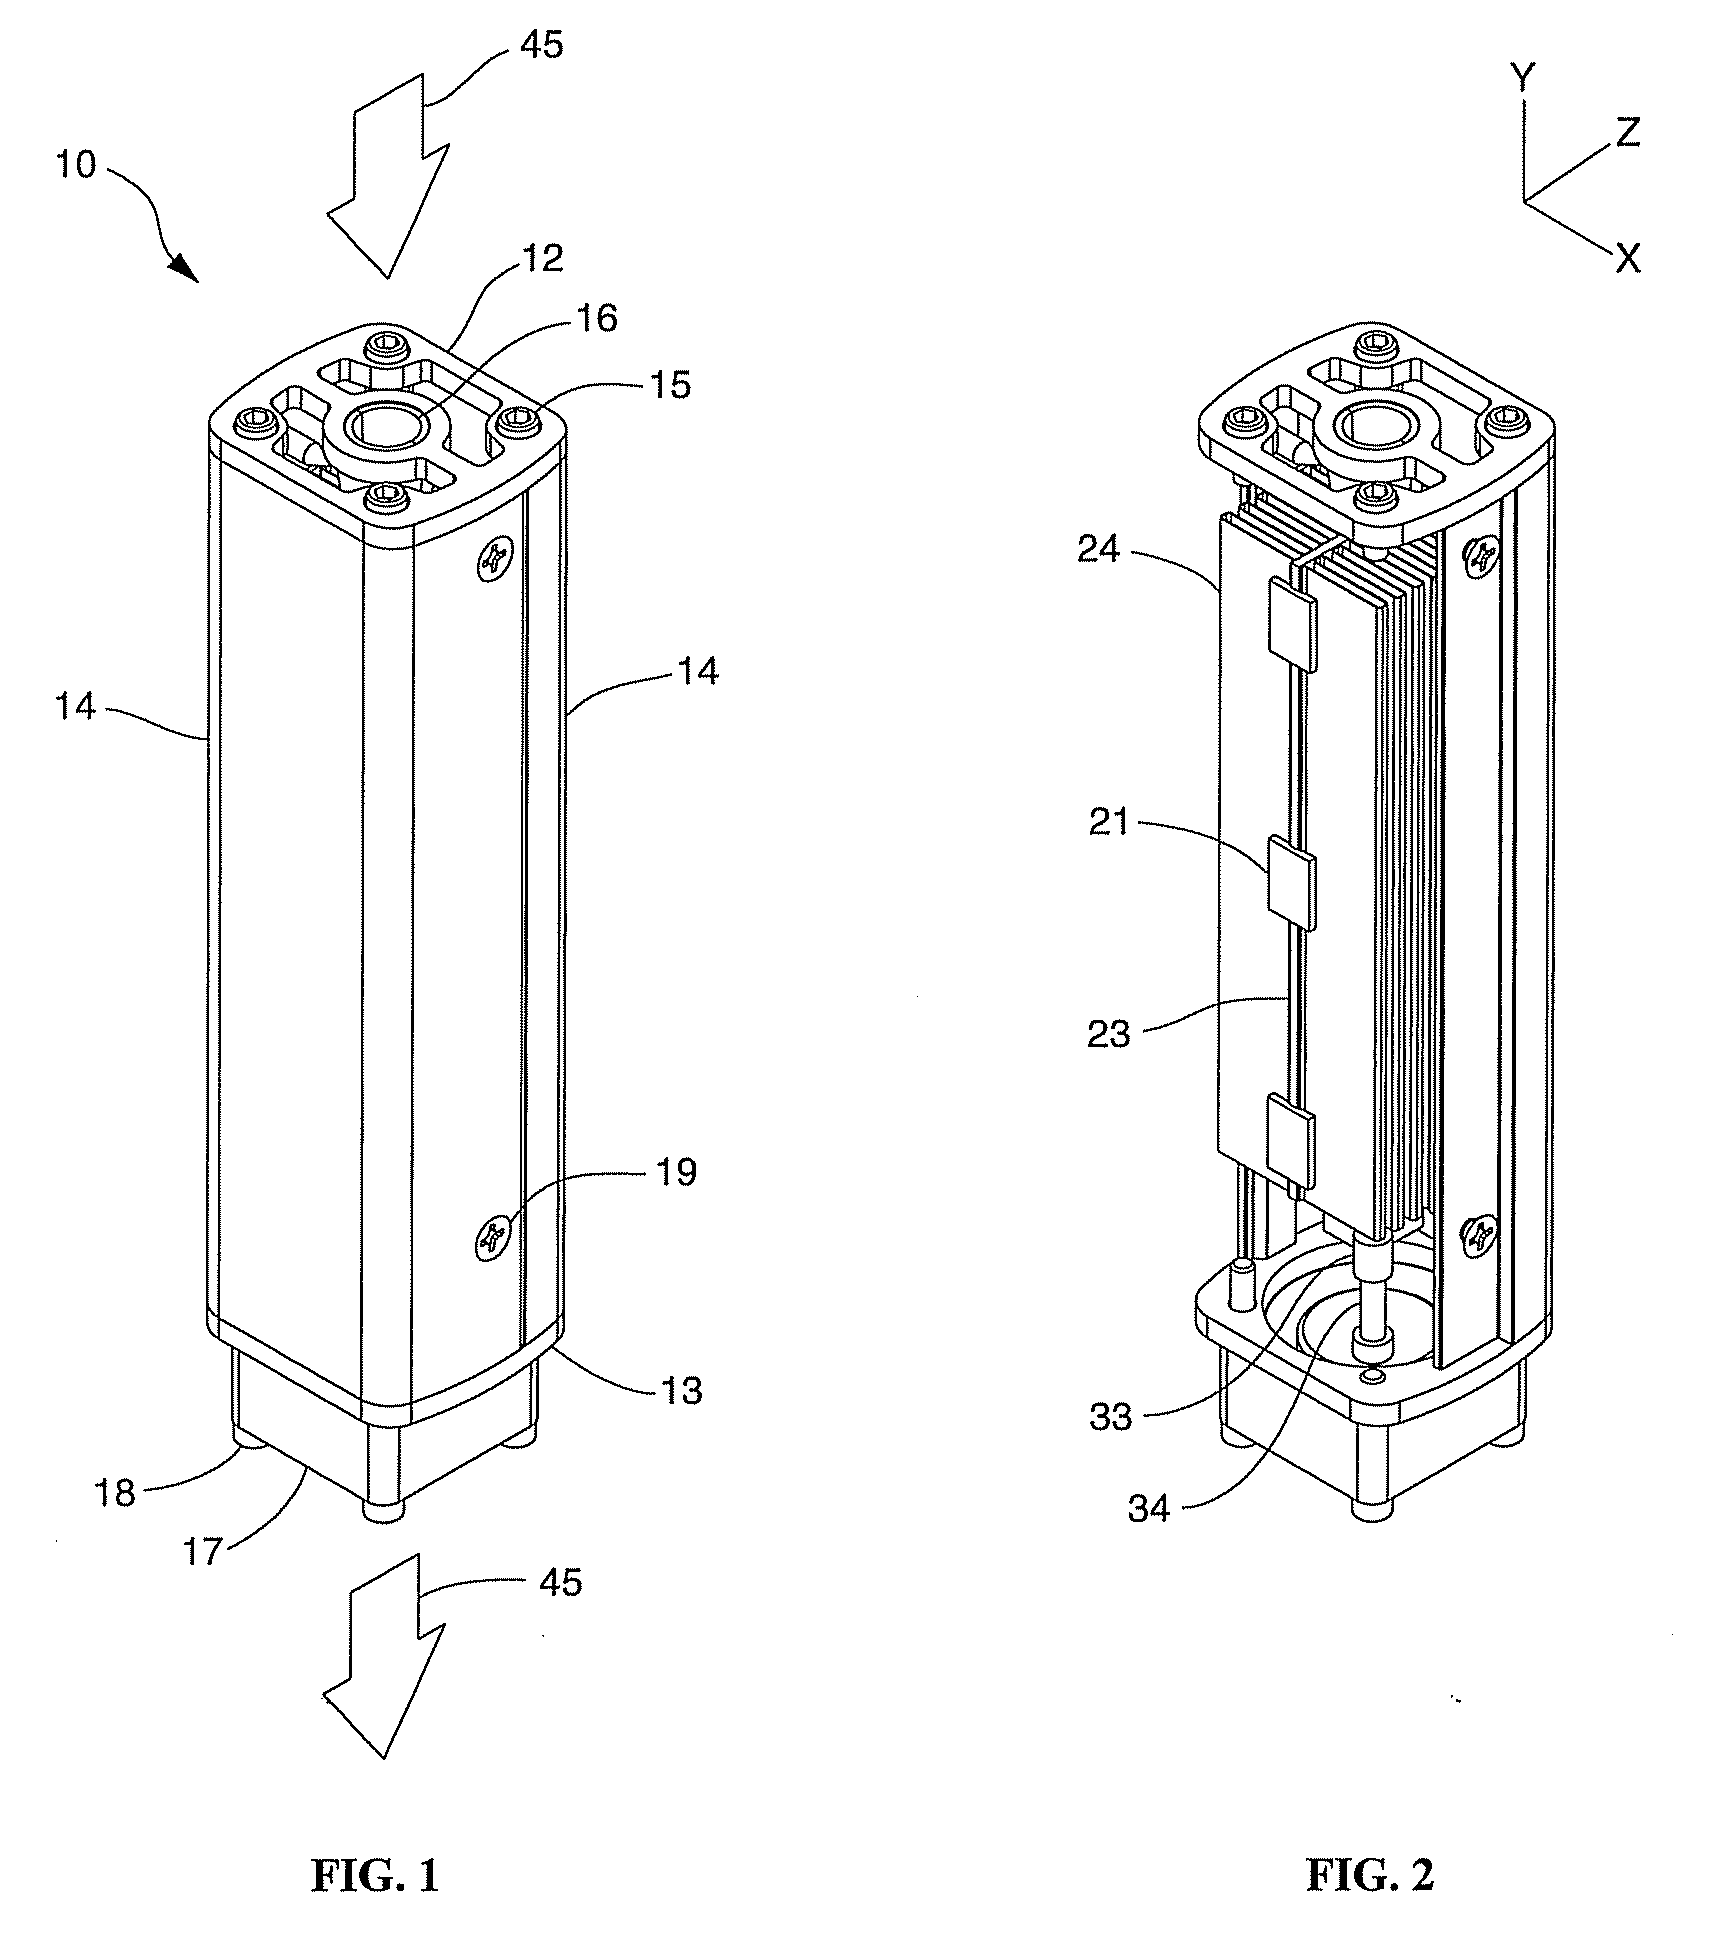 Solid state lighting apparatus utilizing axial thermal dissipation